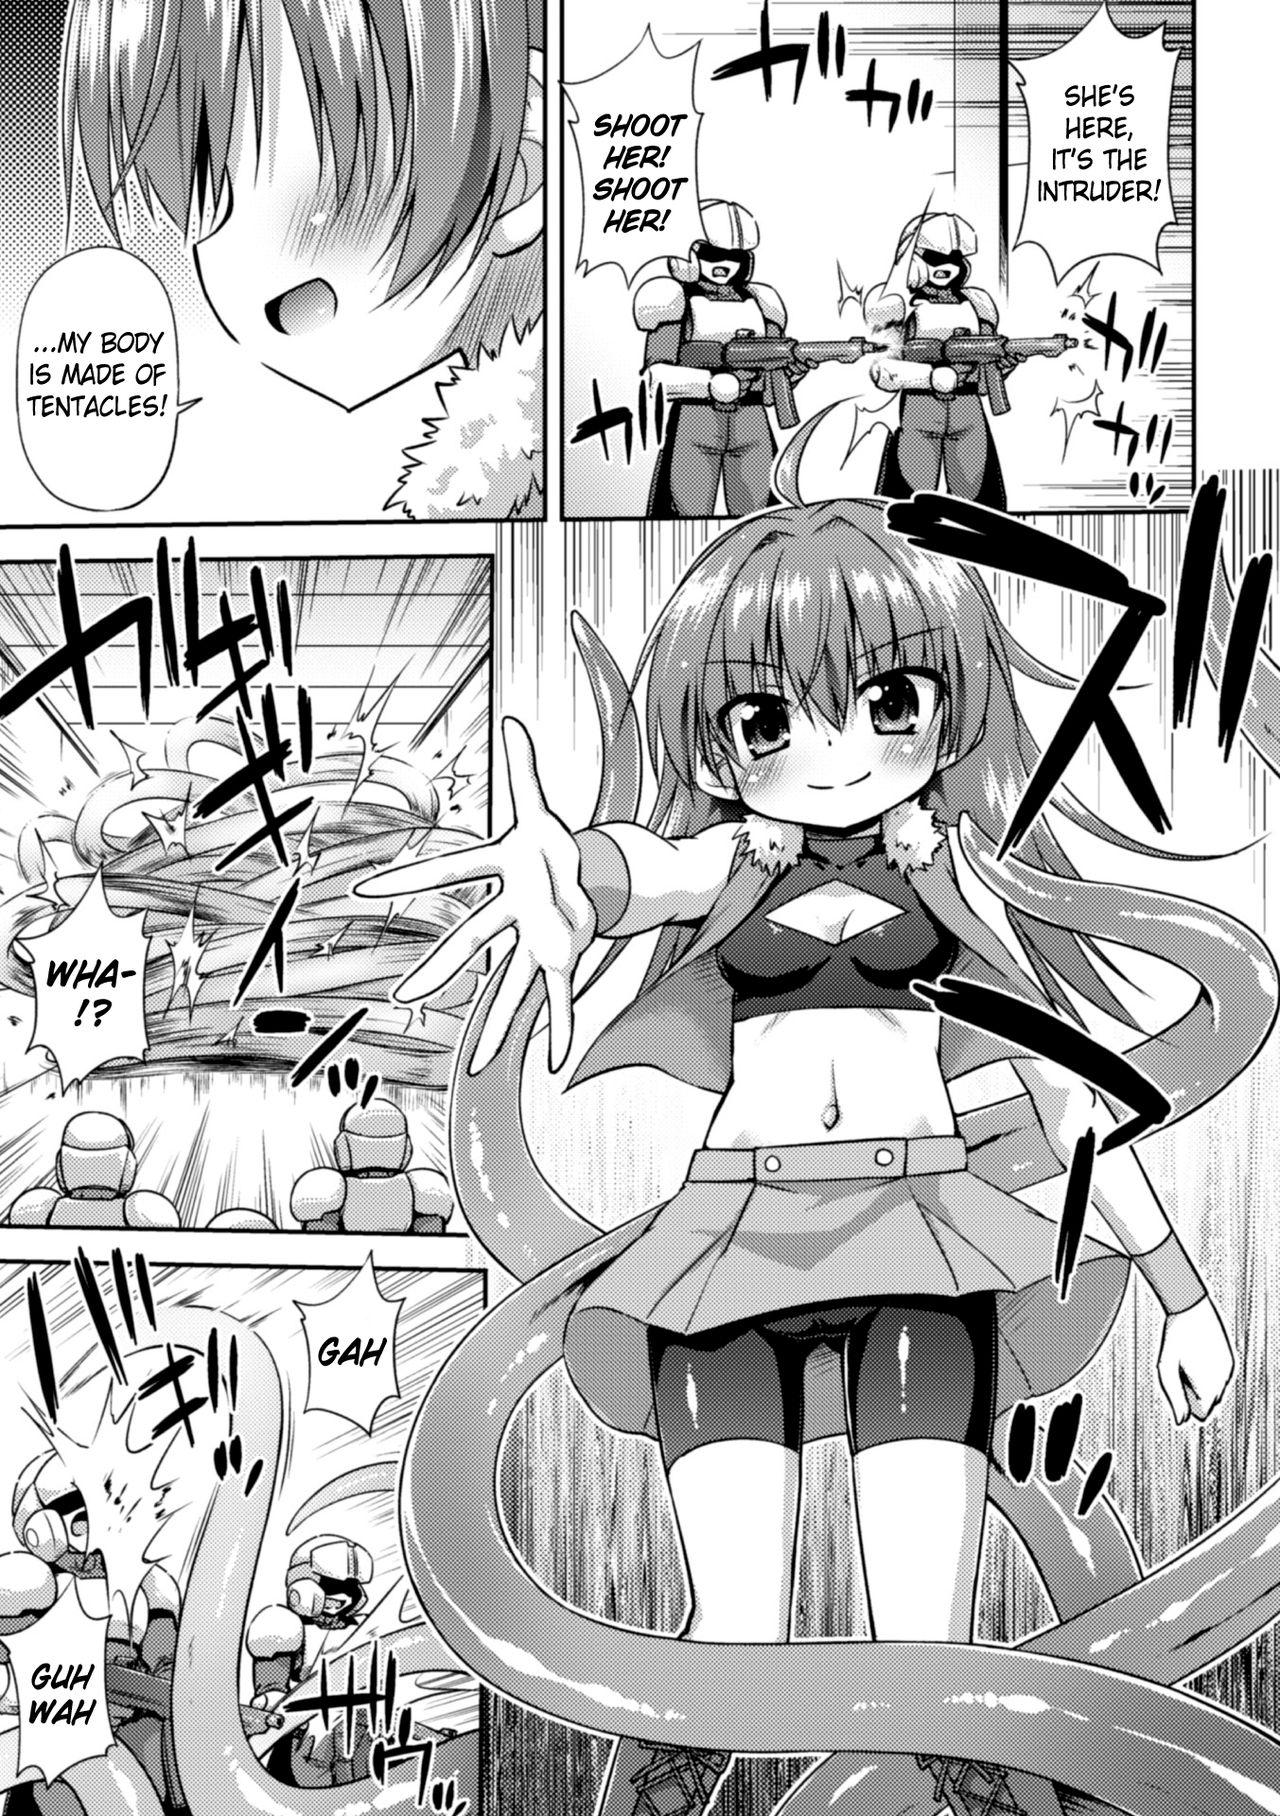 Girl Sucking Dick This World is all Tentacles | Konoyo wa Subete Tentacle! Hot Cunt - Page 5